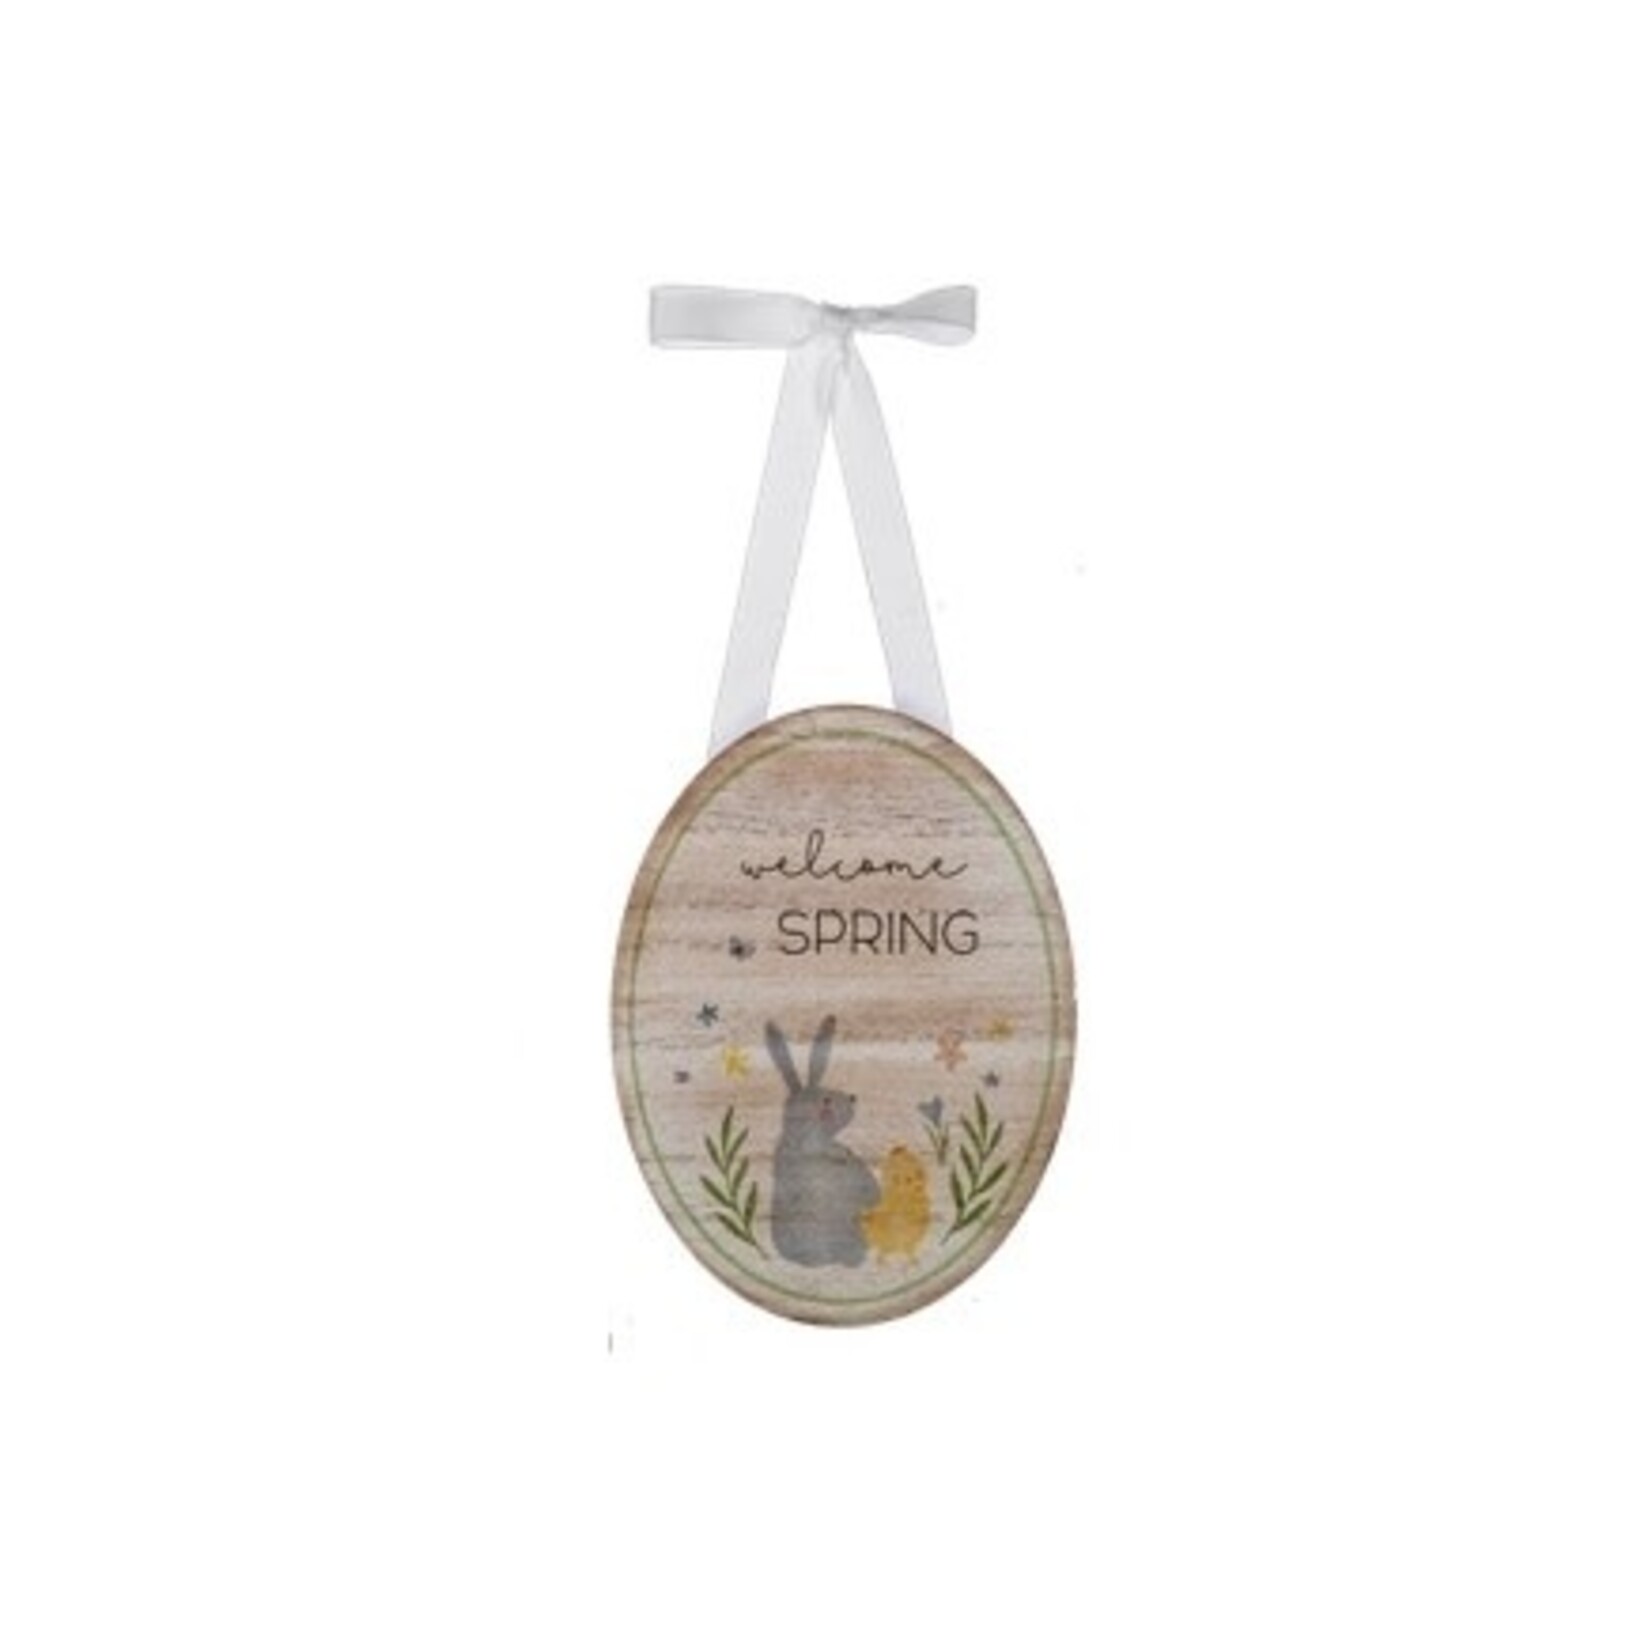 Midwest-CBK Easter Wall Plaque